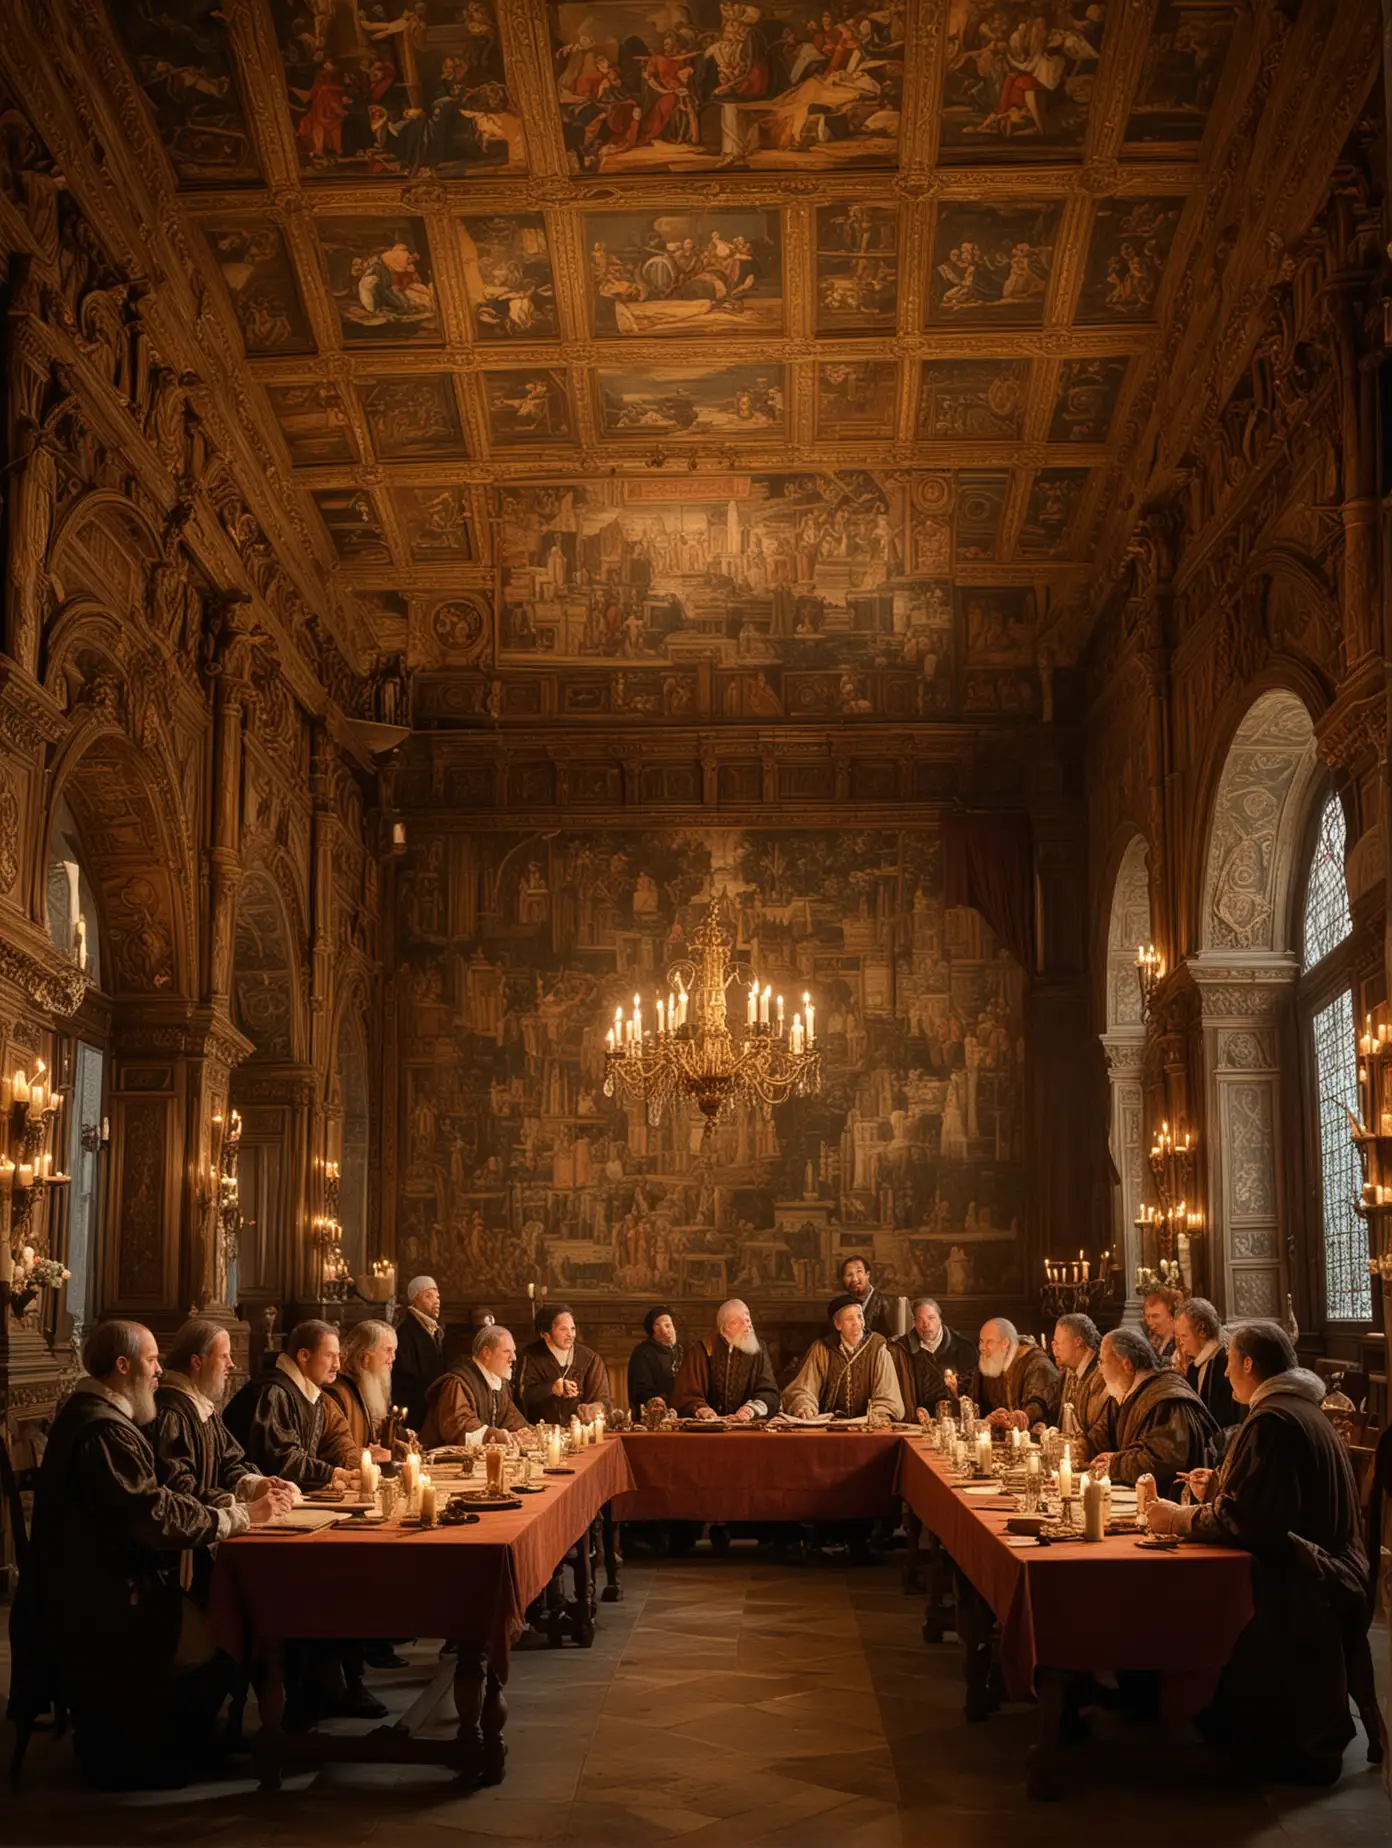 Renaissance Scholars Engage in Intellectual Discourse around Grand Hall Table